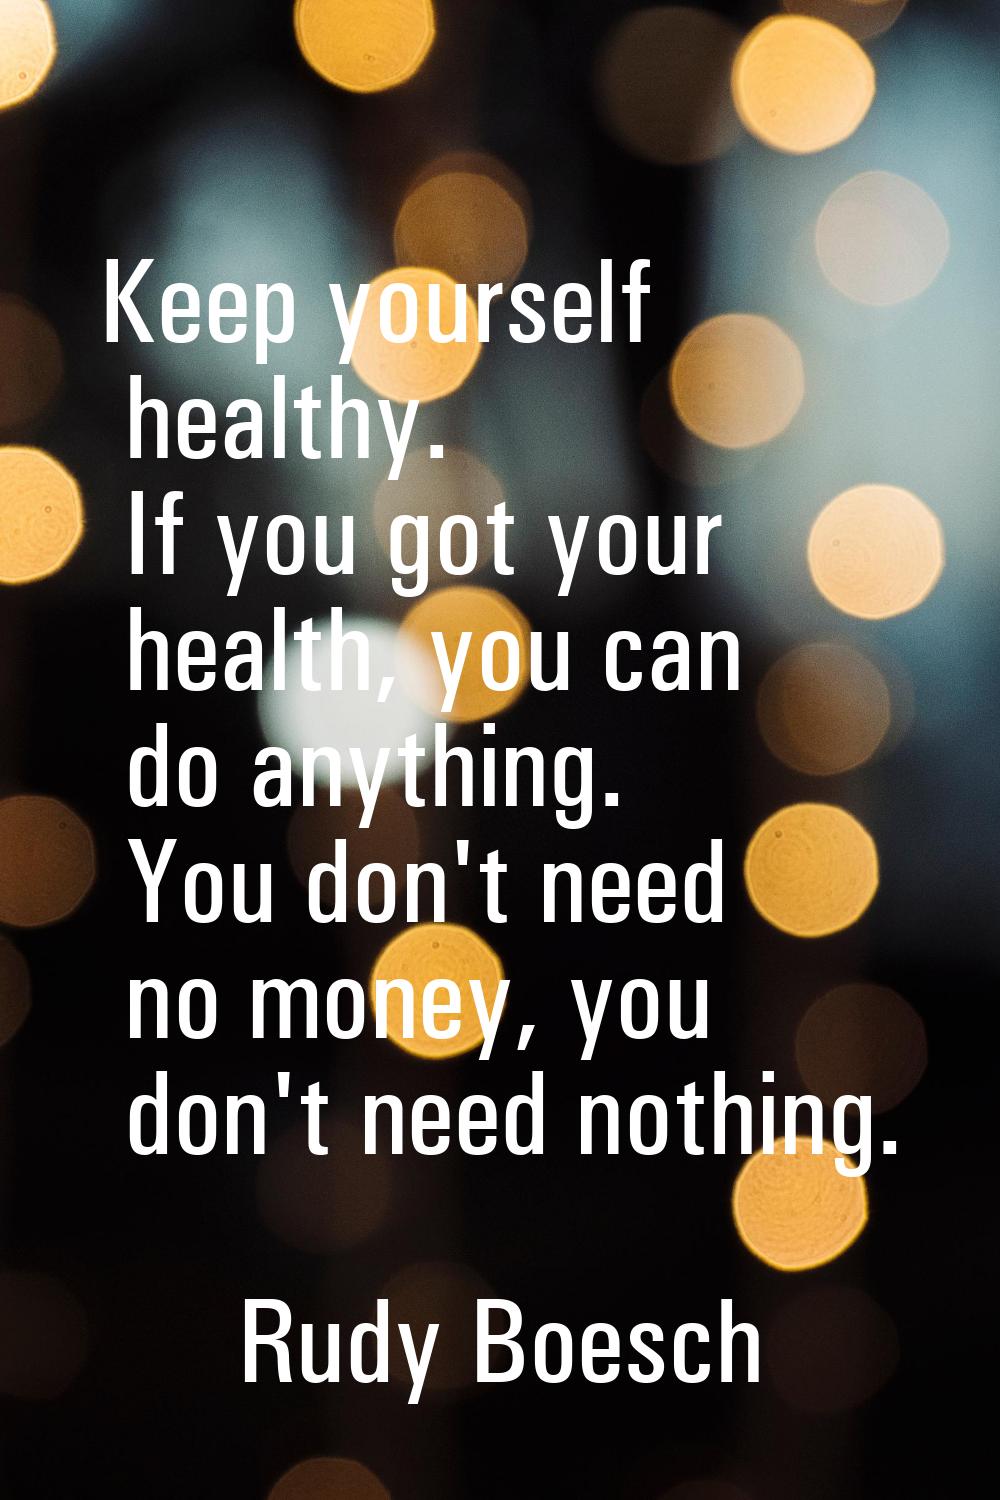 Keep yourself healthy. If you got your health, you can do anything. You don't need no money, you do